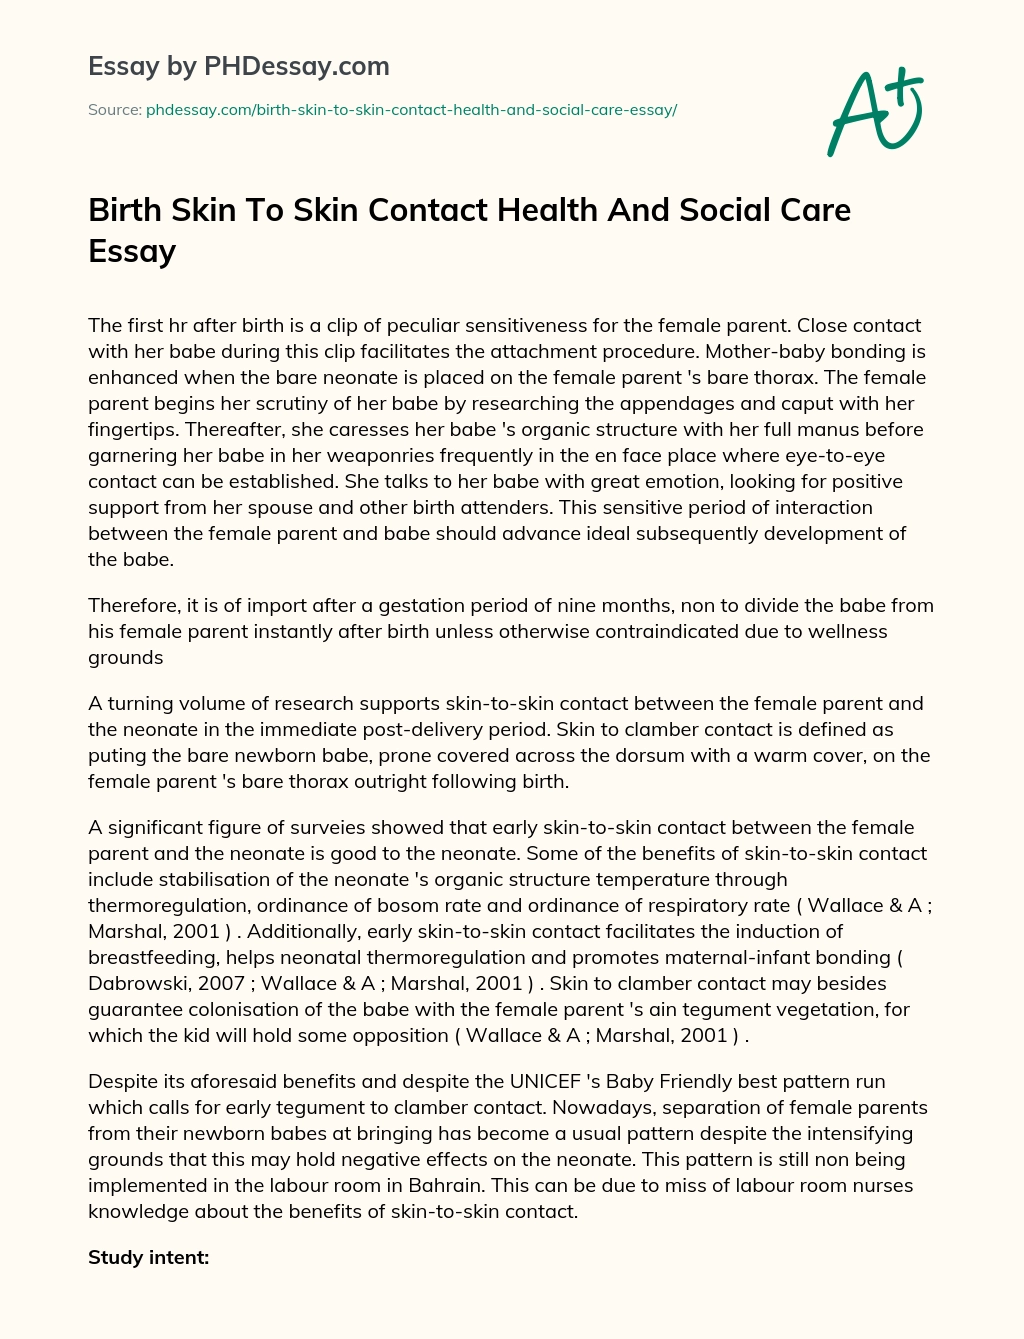 Birth Skin To Skin Contact Health And Social Care Essay essay